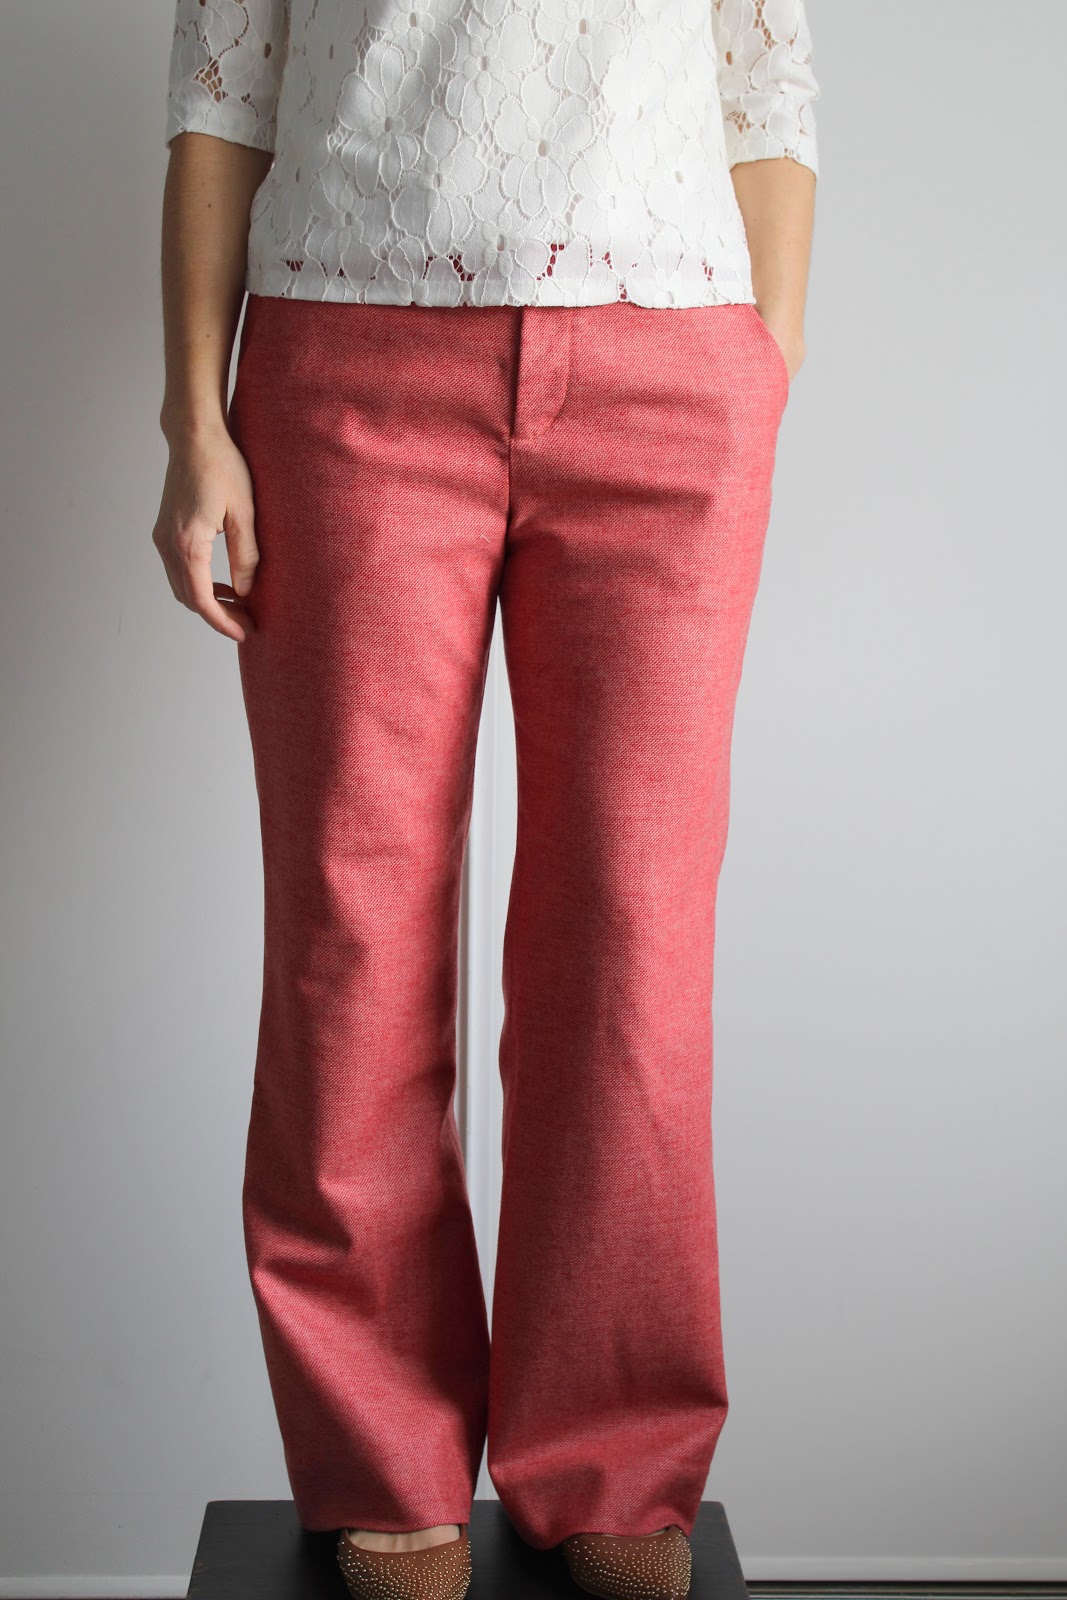 Nicole at Home: Tomato wool tweed trousers